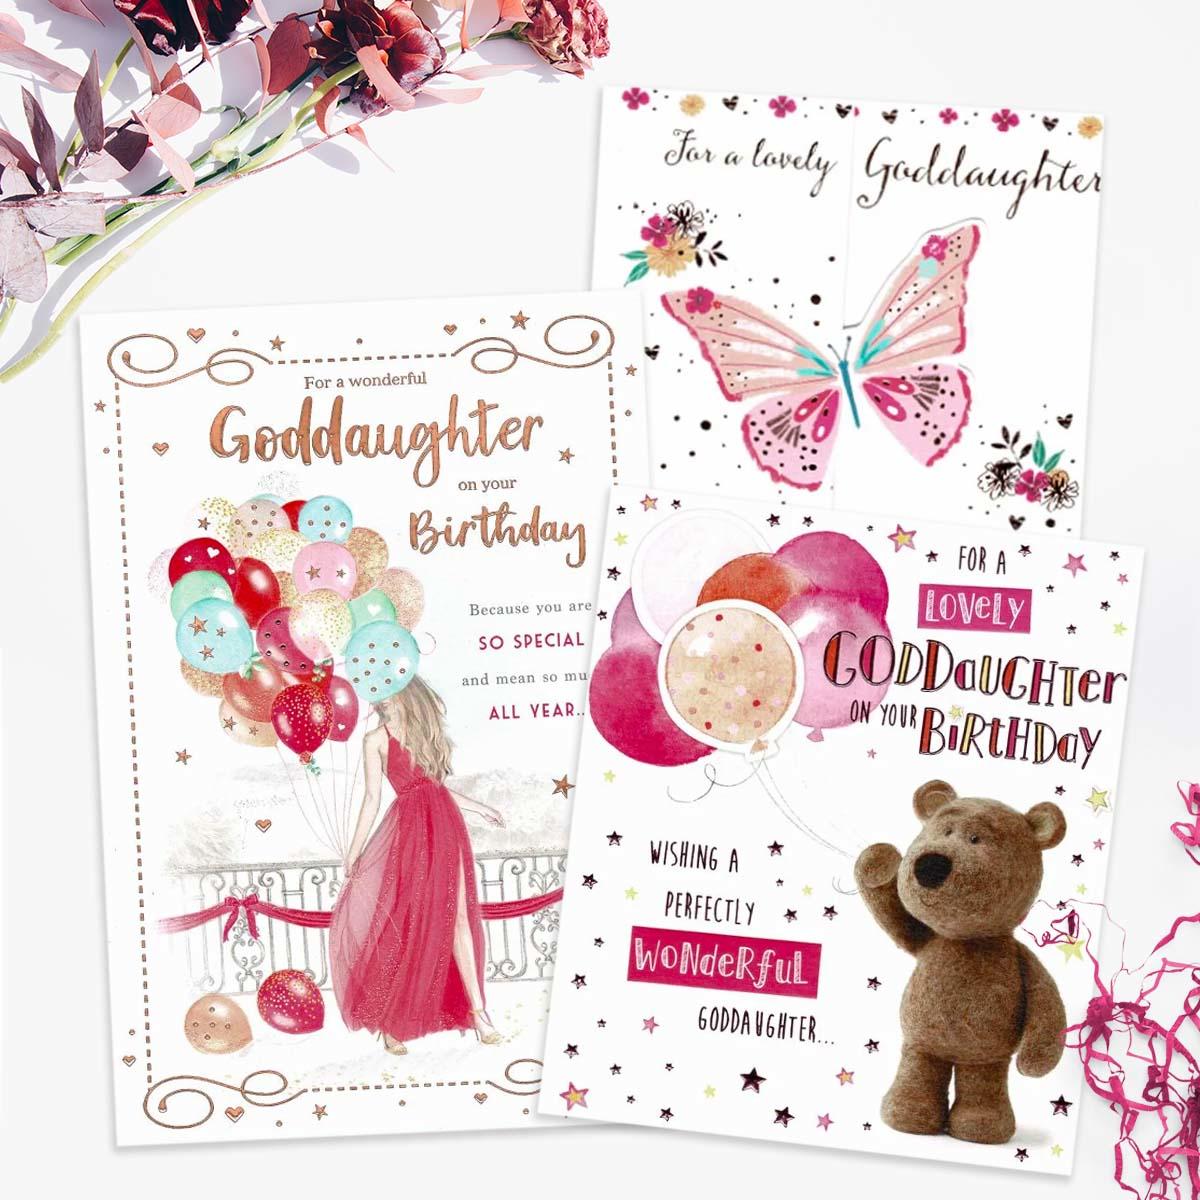 A Selection Of Cards To Show The Depth Of Range In Our Goddaughter Birthday Section